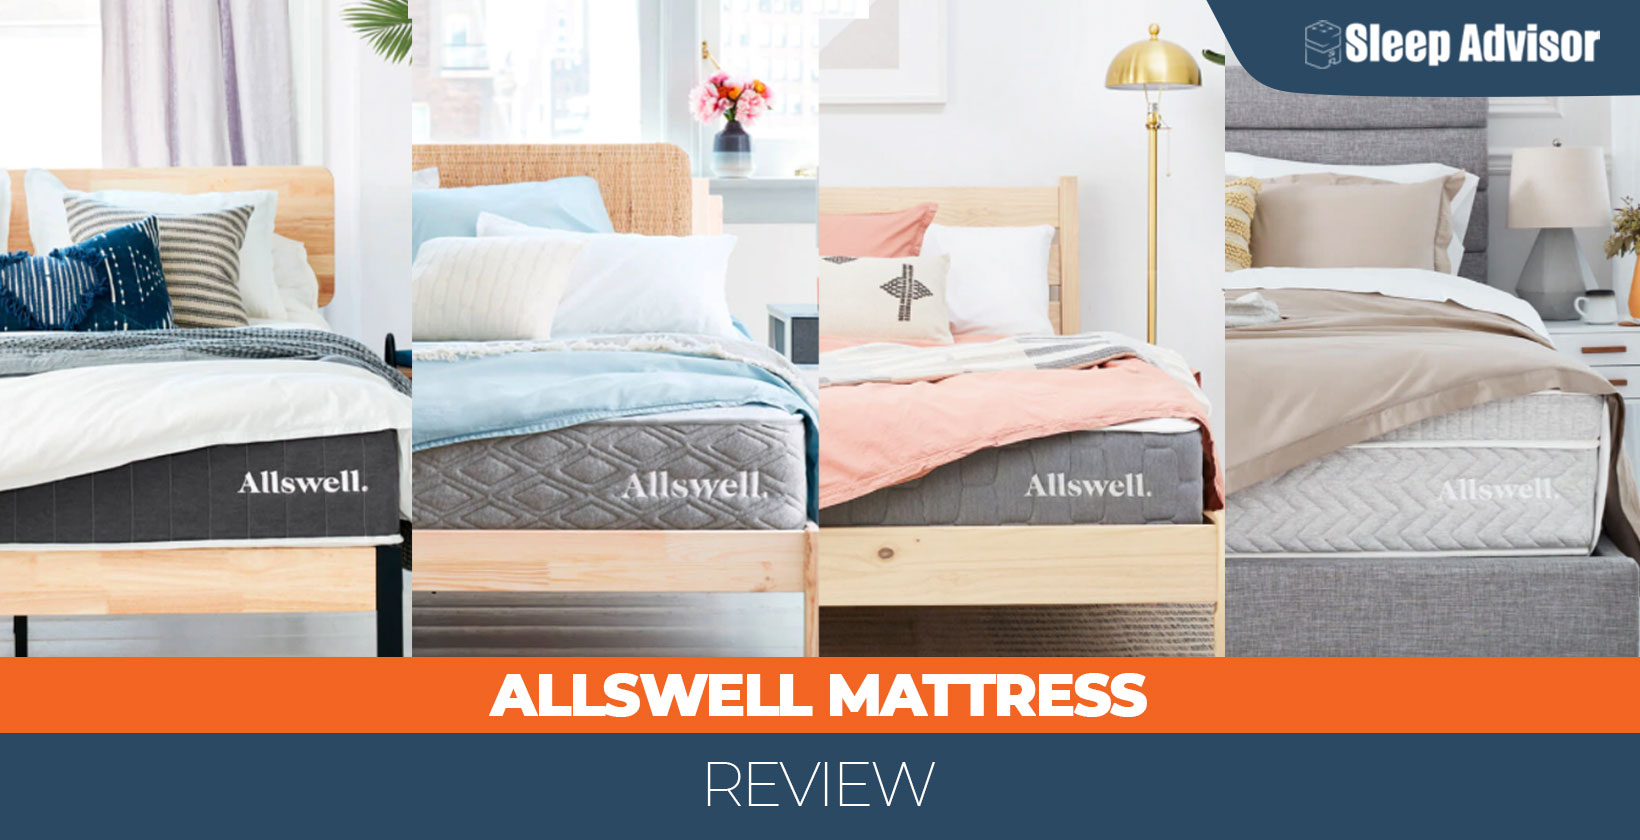 Allswell Mattress Review and Prices